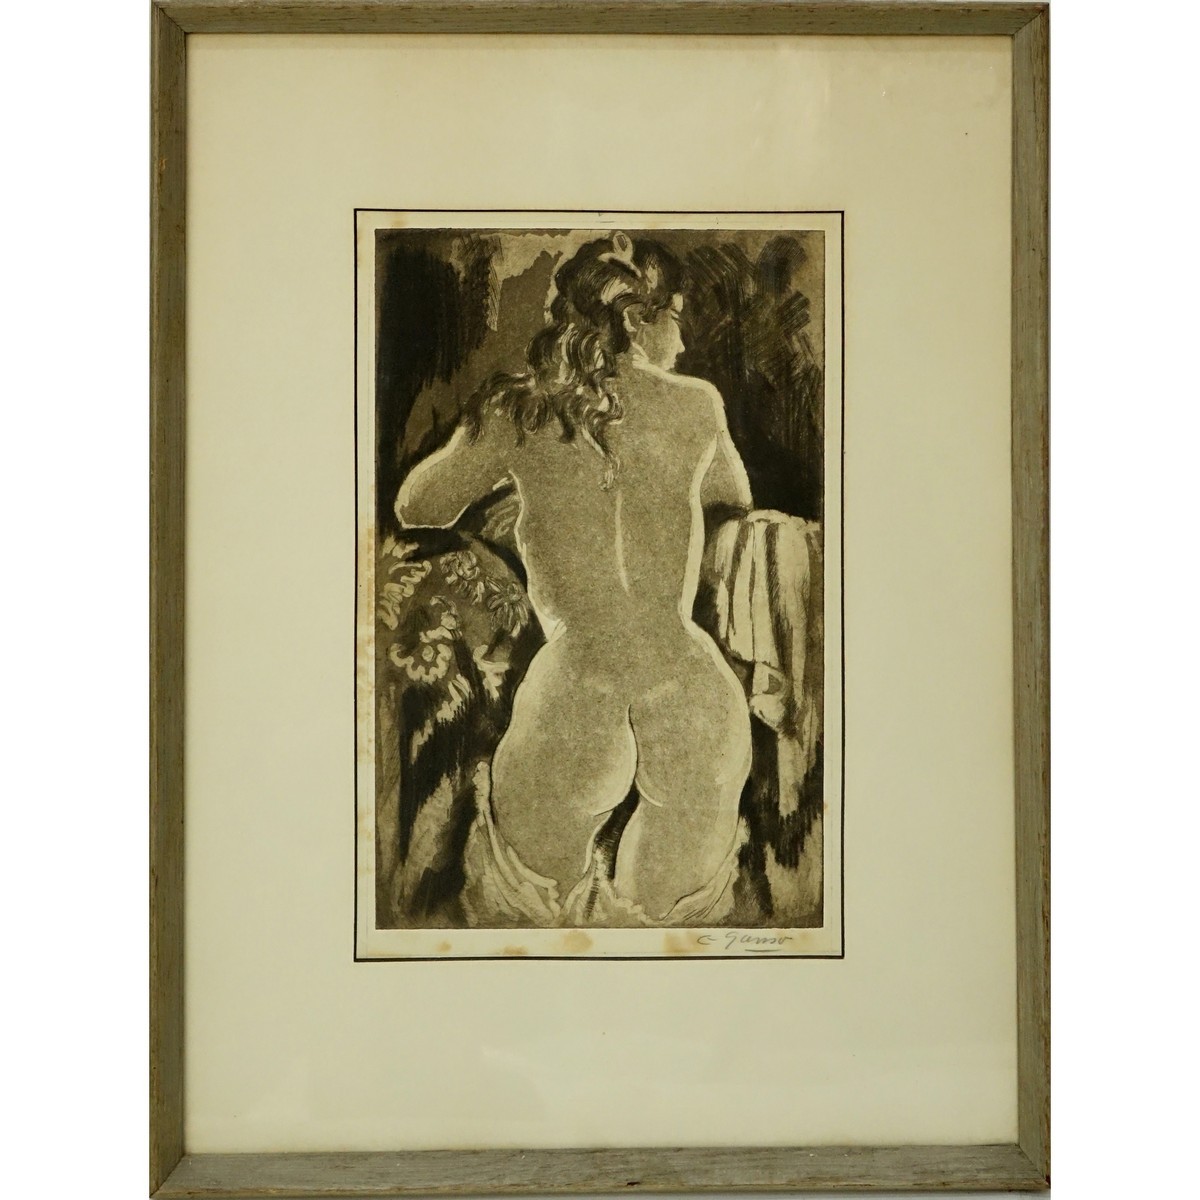 20th Century Etching "Nude". Signed in pencil lower right. Toning and foxing. Measures 11-3/4" x 7-